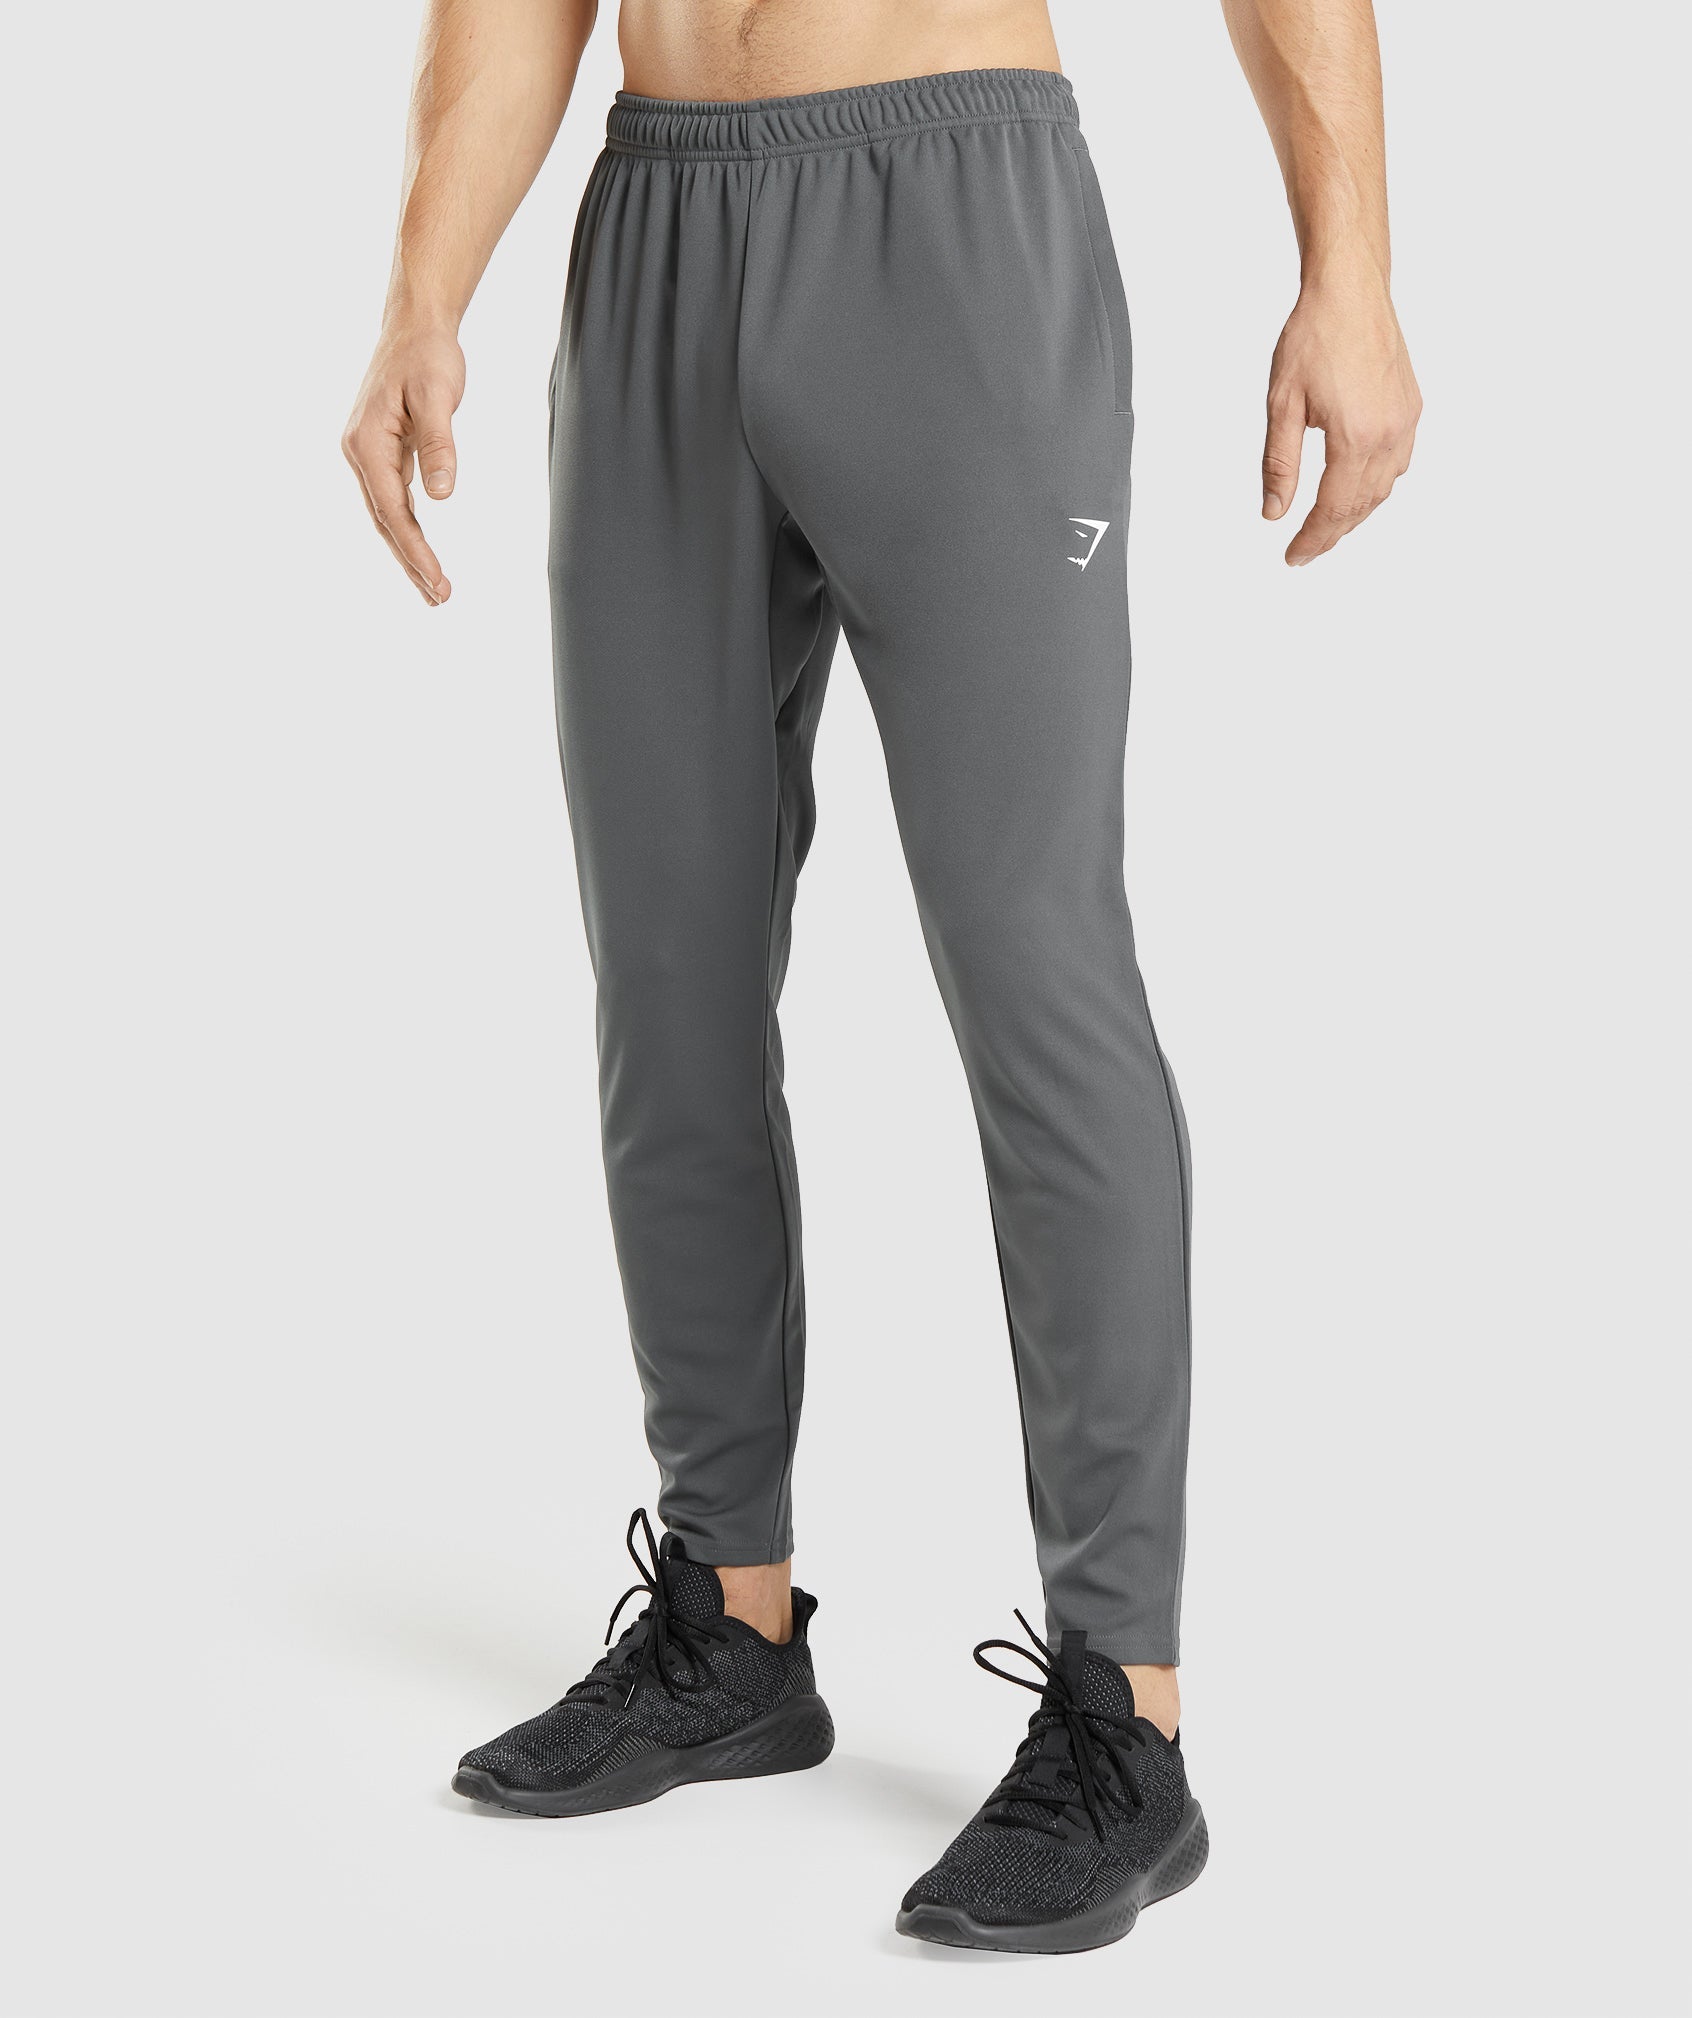 Gymshark Arrival Knit Joggers - Charcoal Grey